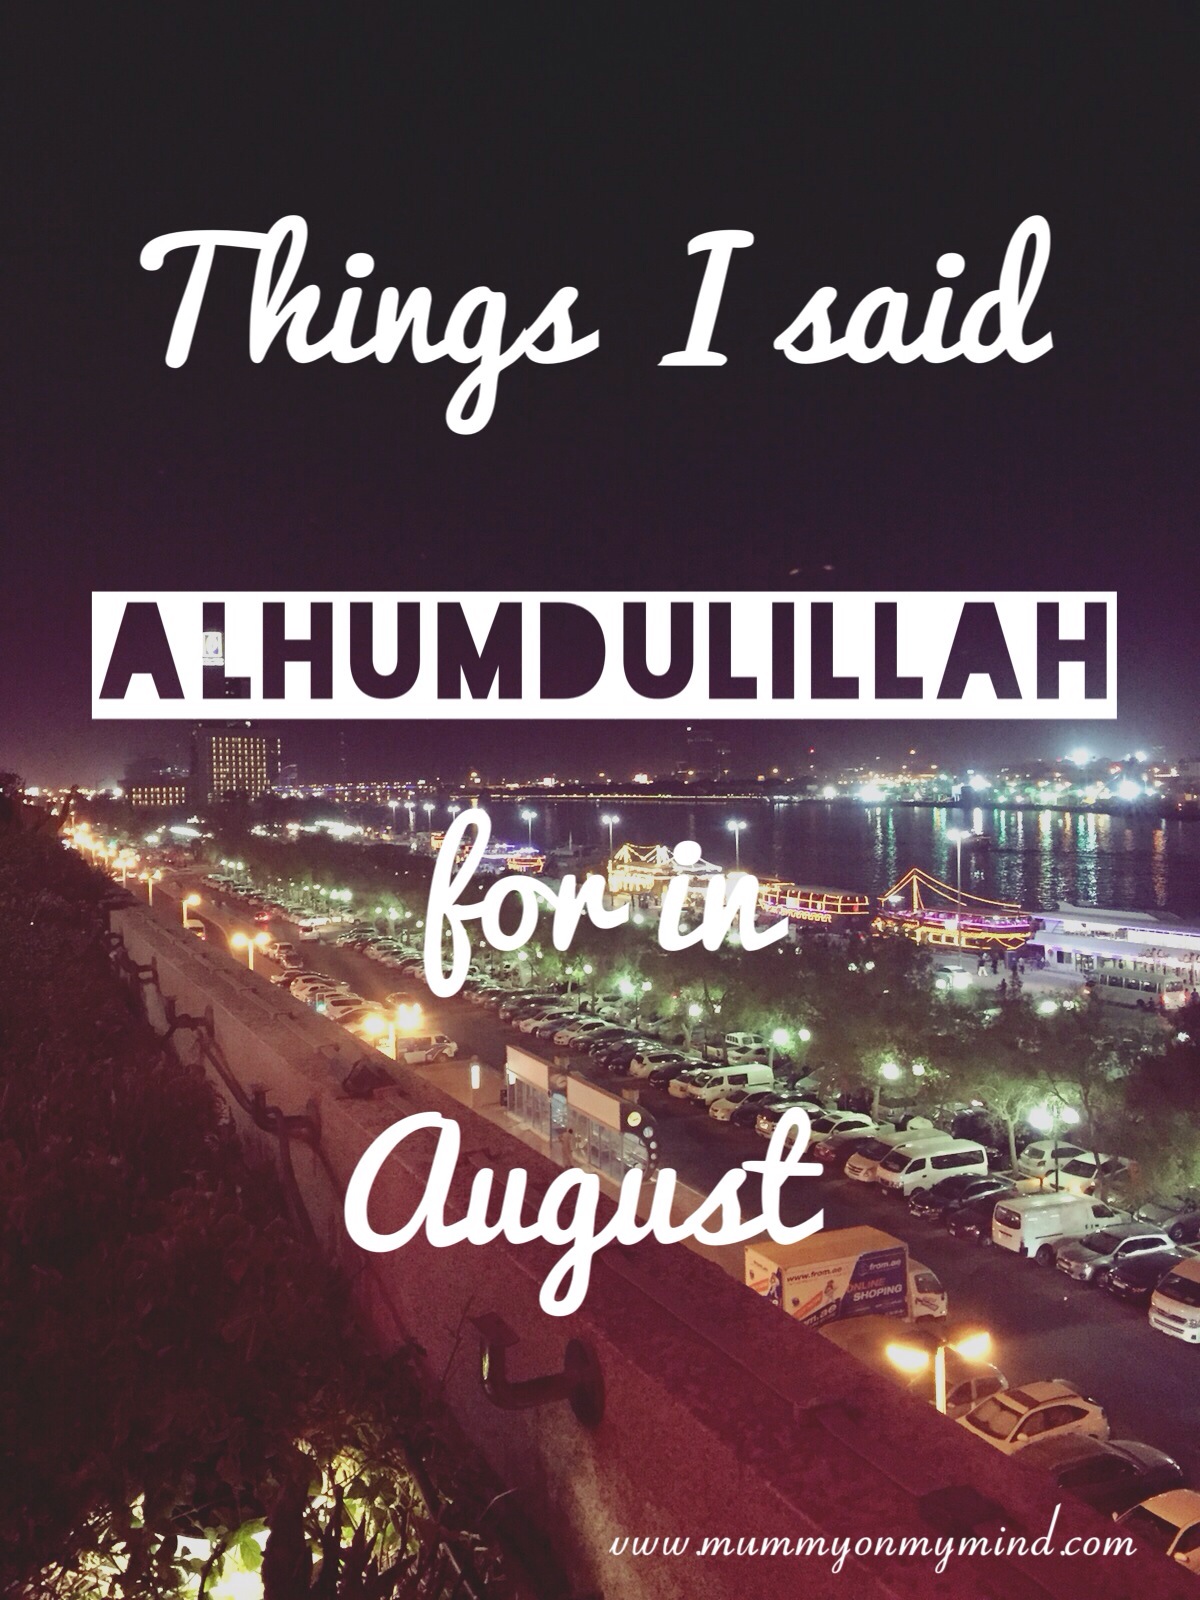 Things I said Alhumdulillah for in August 2015…